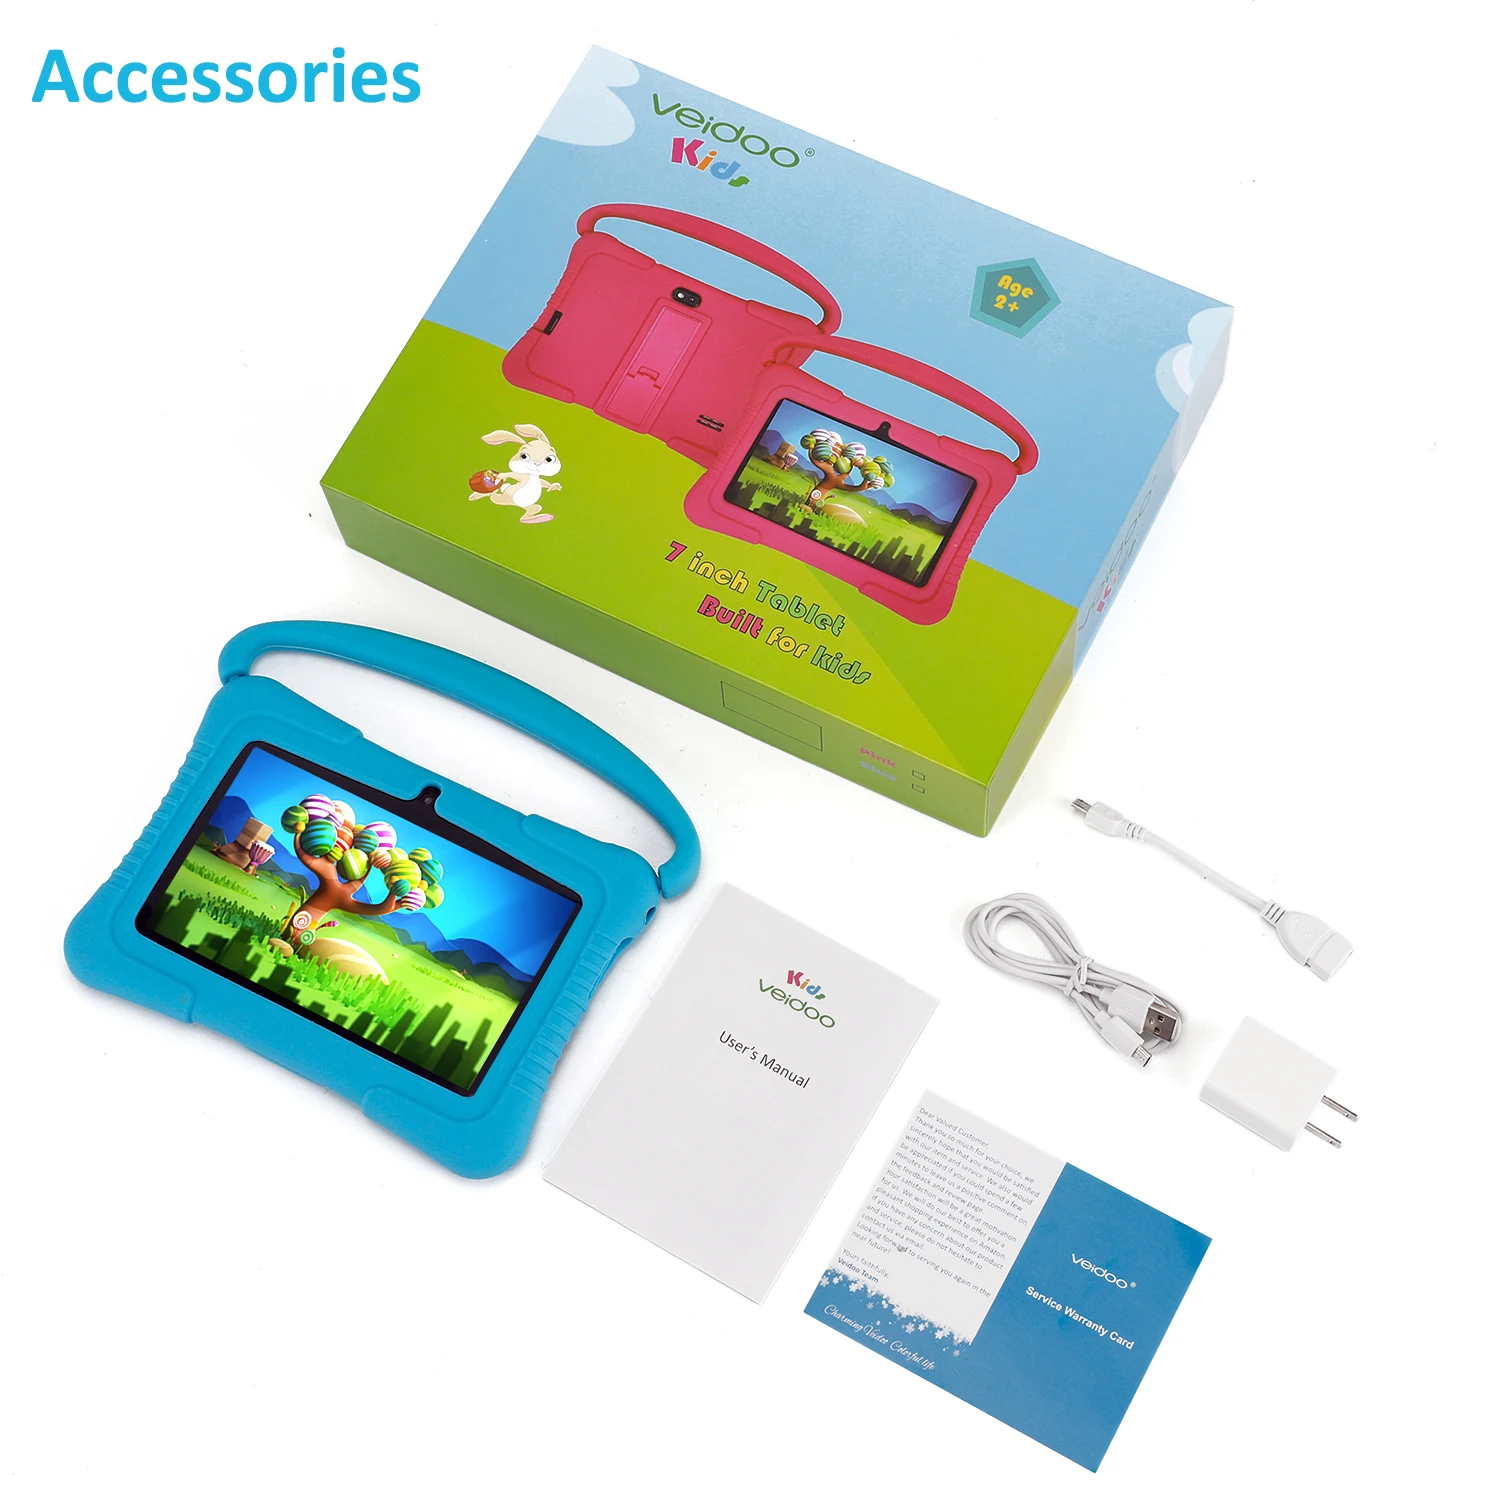 Product Price 7 Inch Android Kids Tablet Without Sim Card - Buy